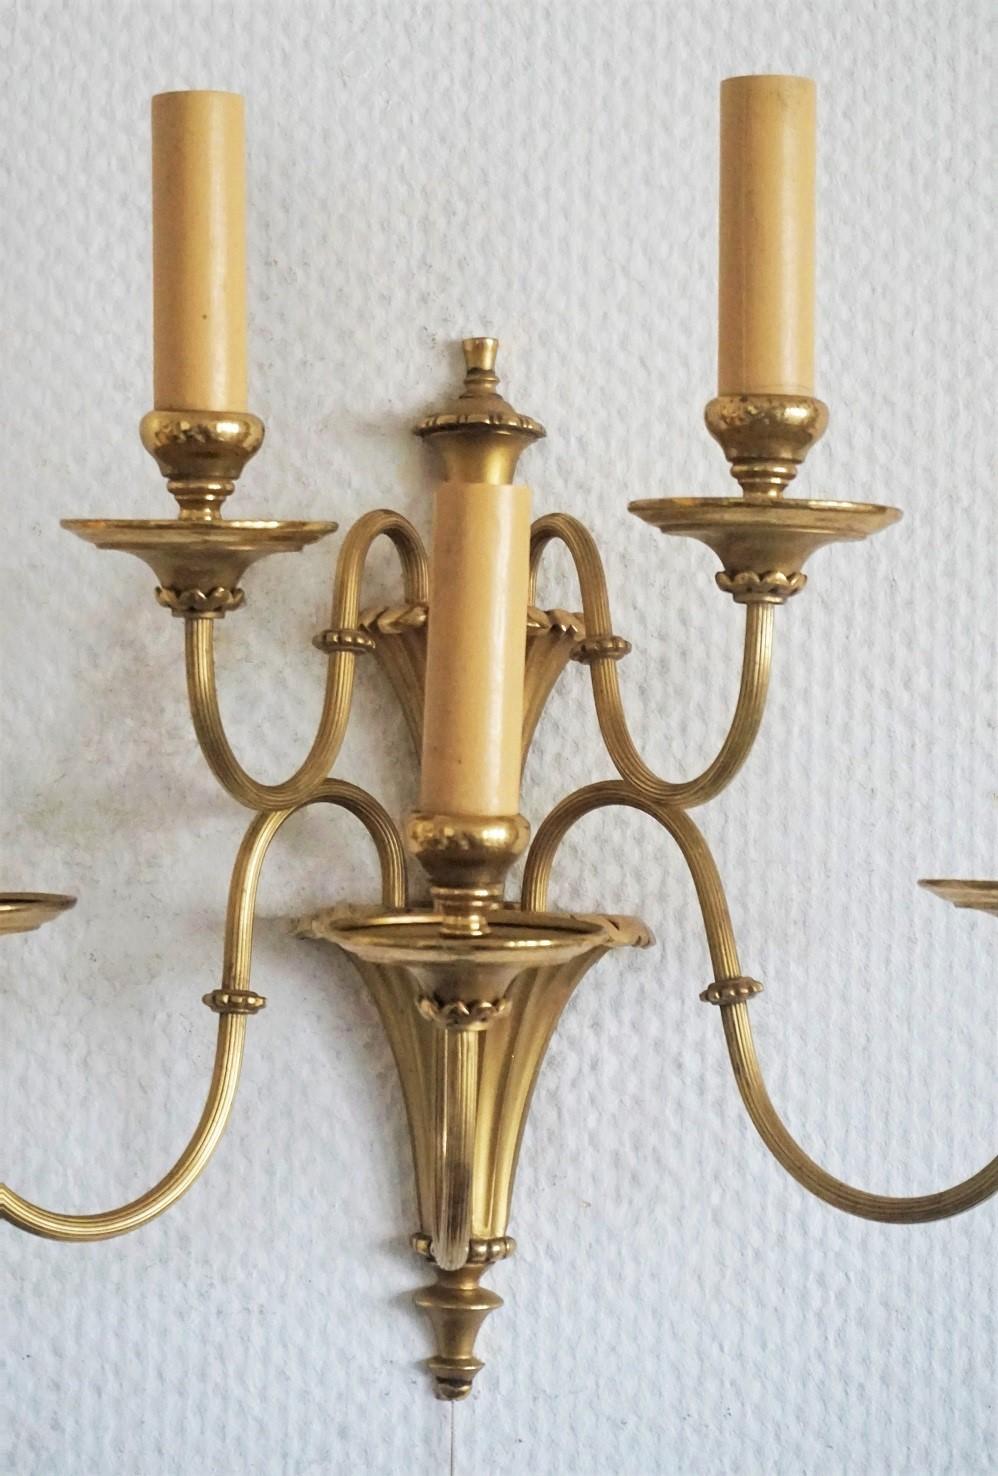 19th Century Pair of English Victorian Style Gilt Brass Five-Light Electrified Wall Sconces